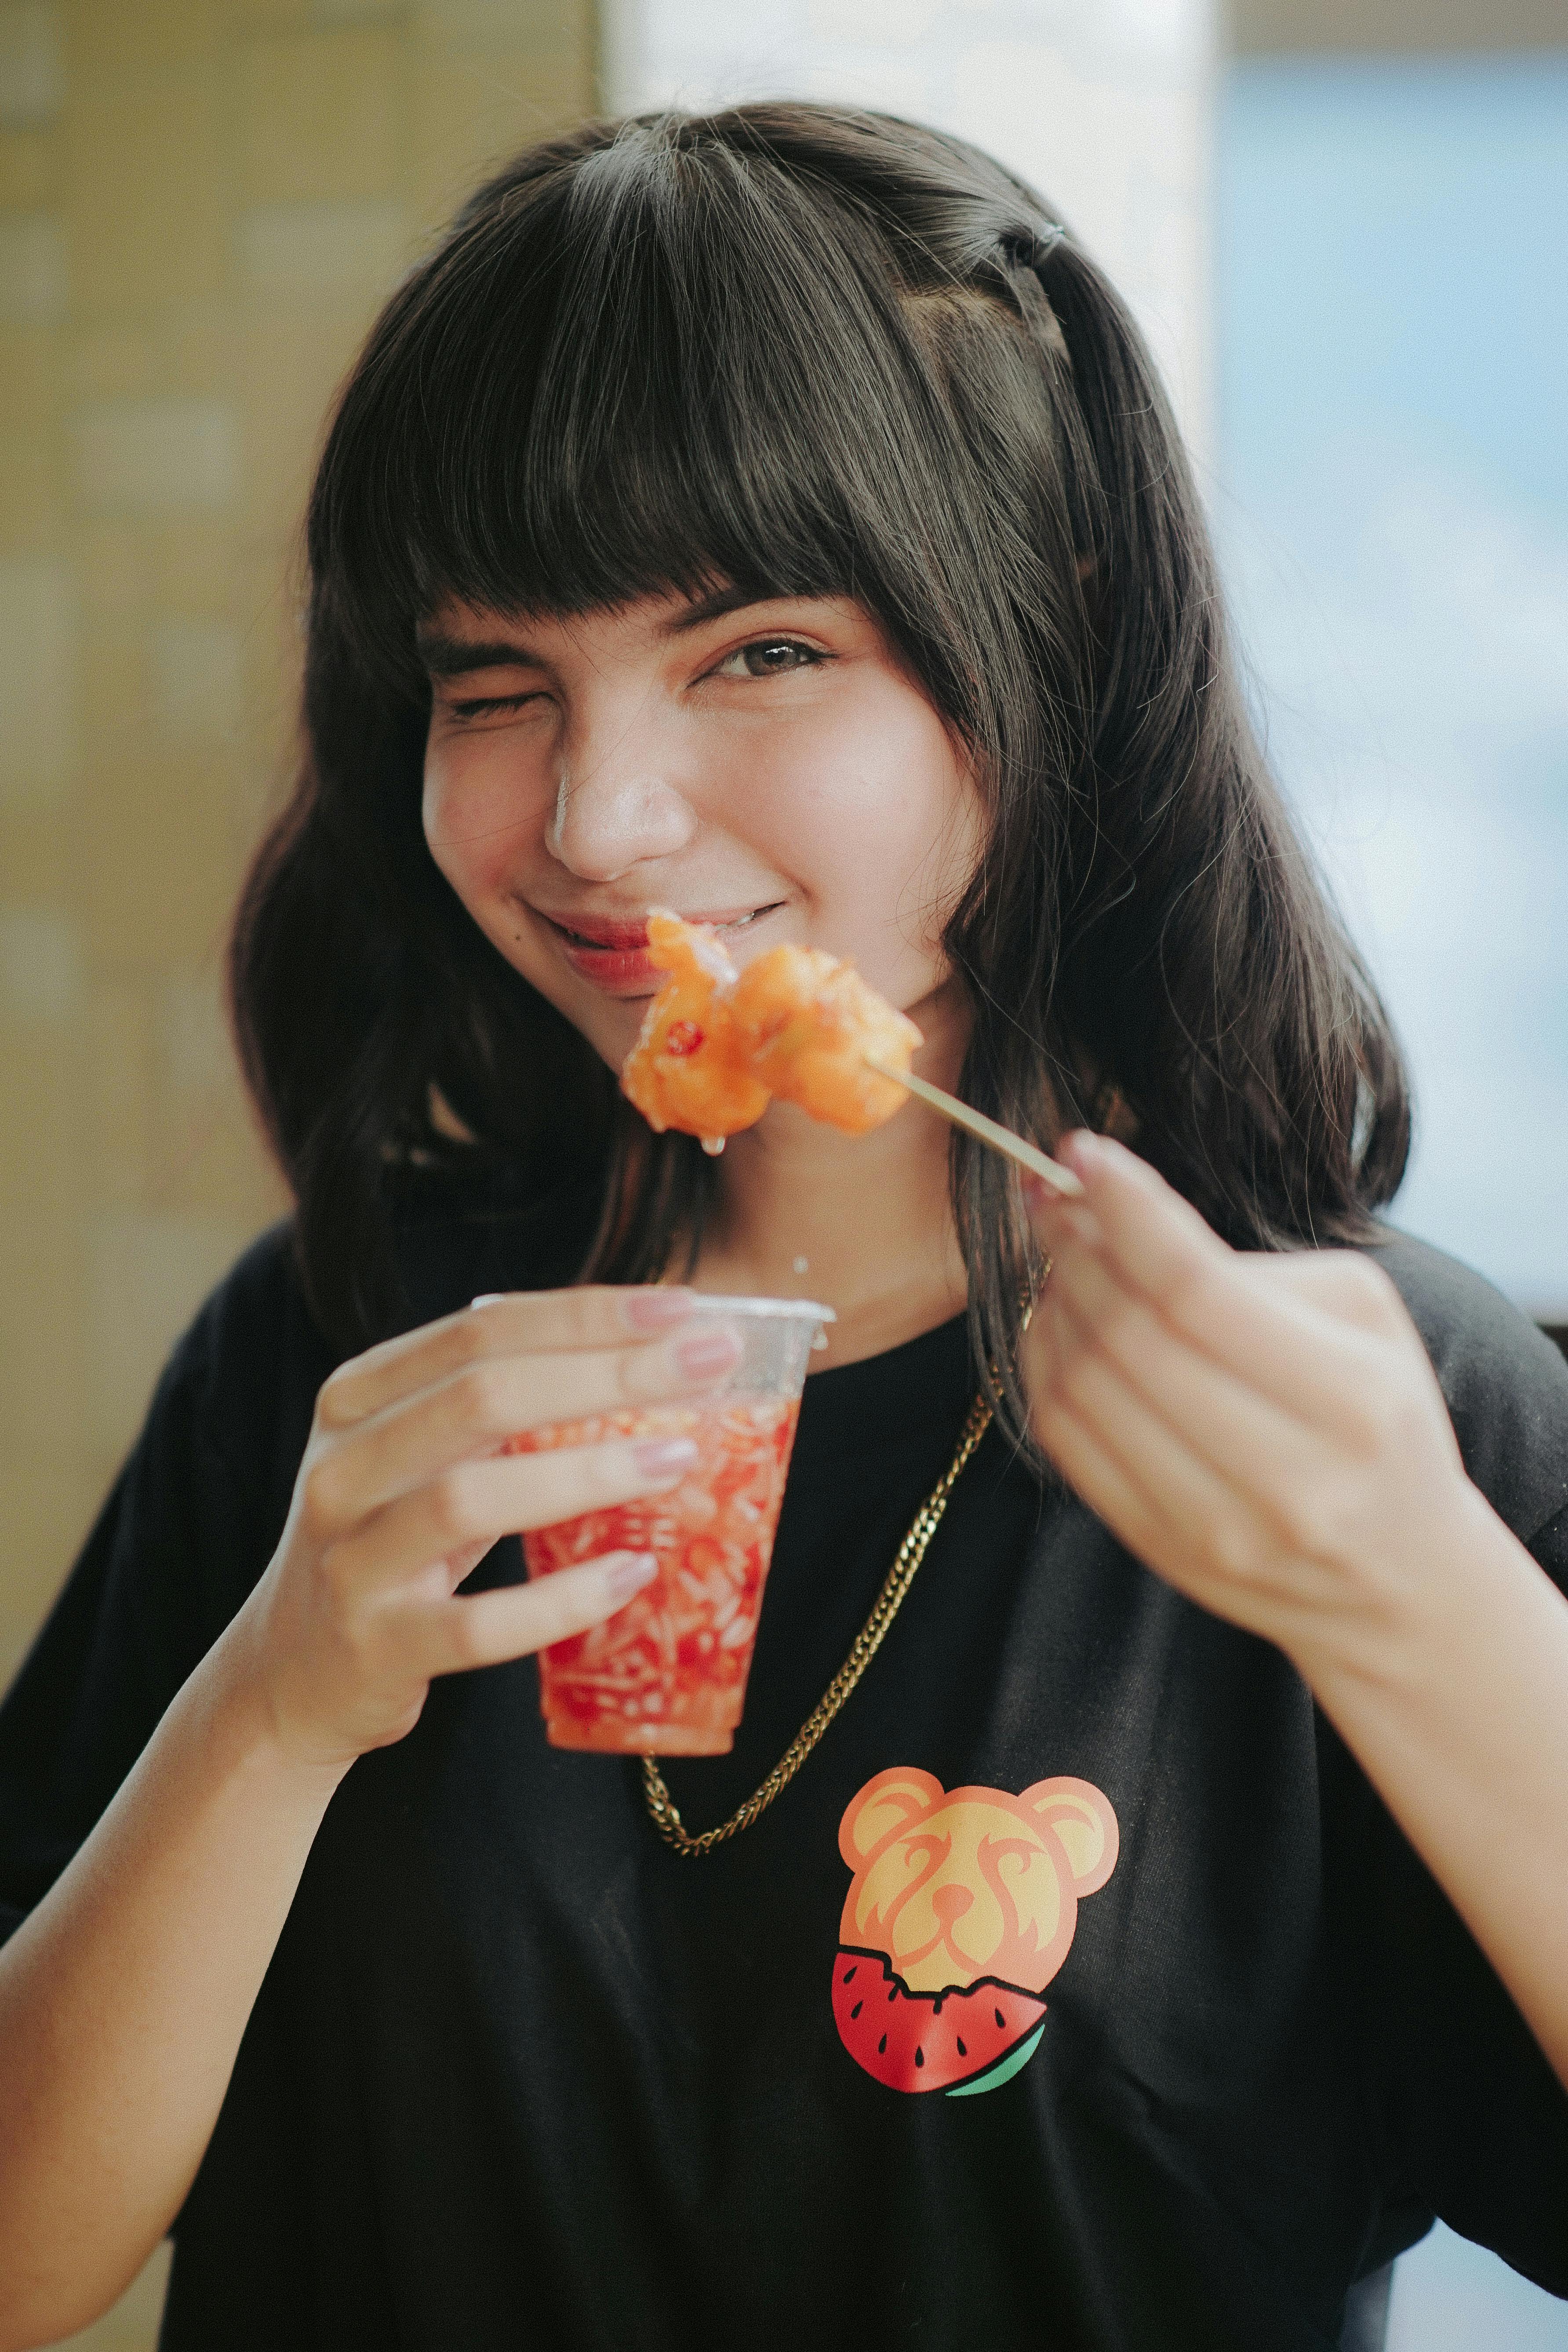 woman holding a plastic and eating street food